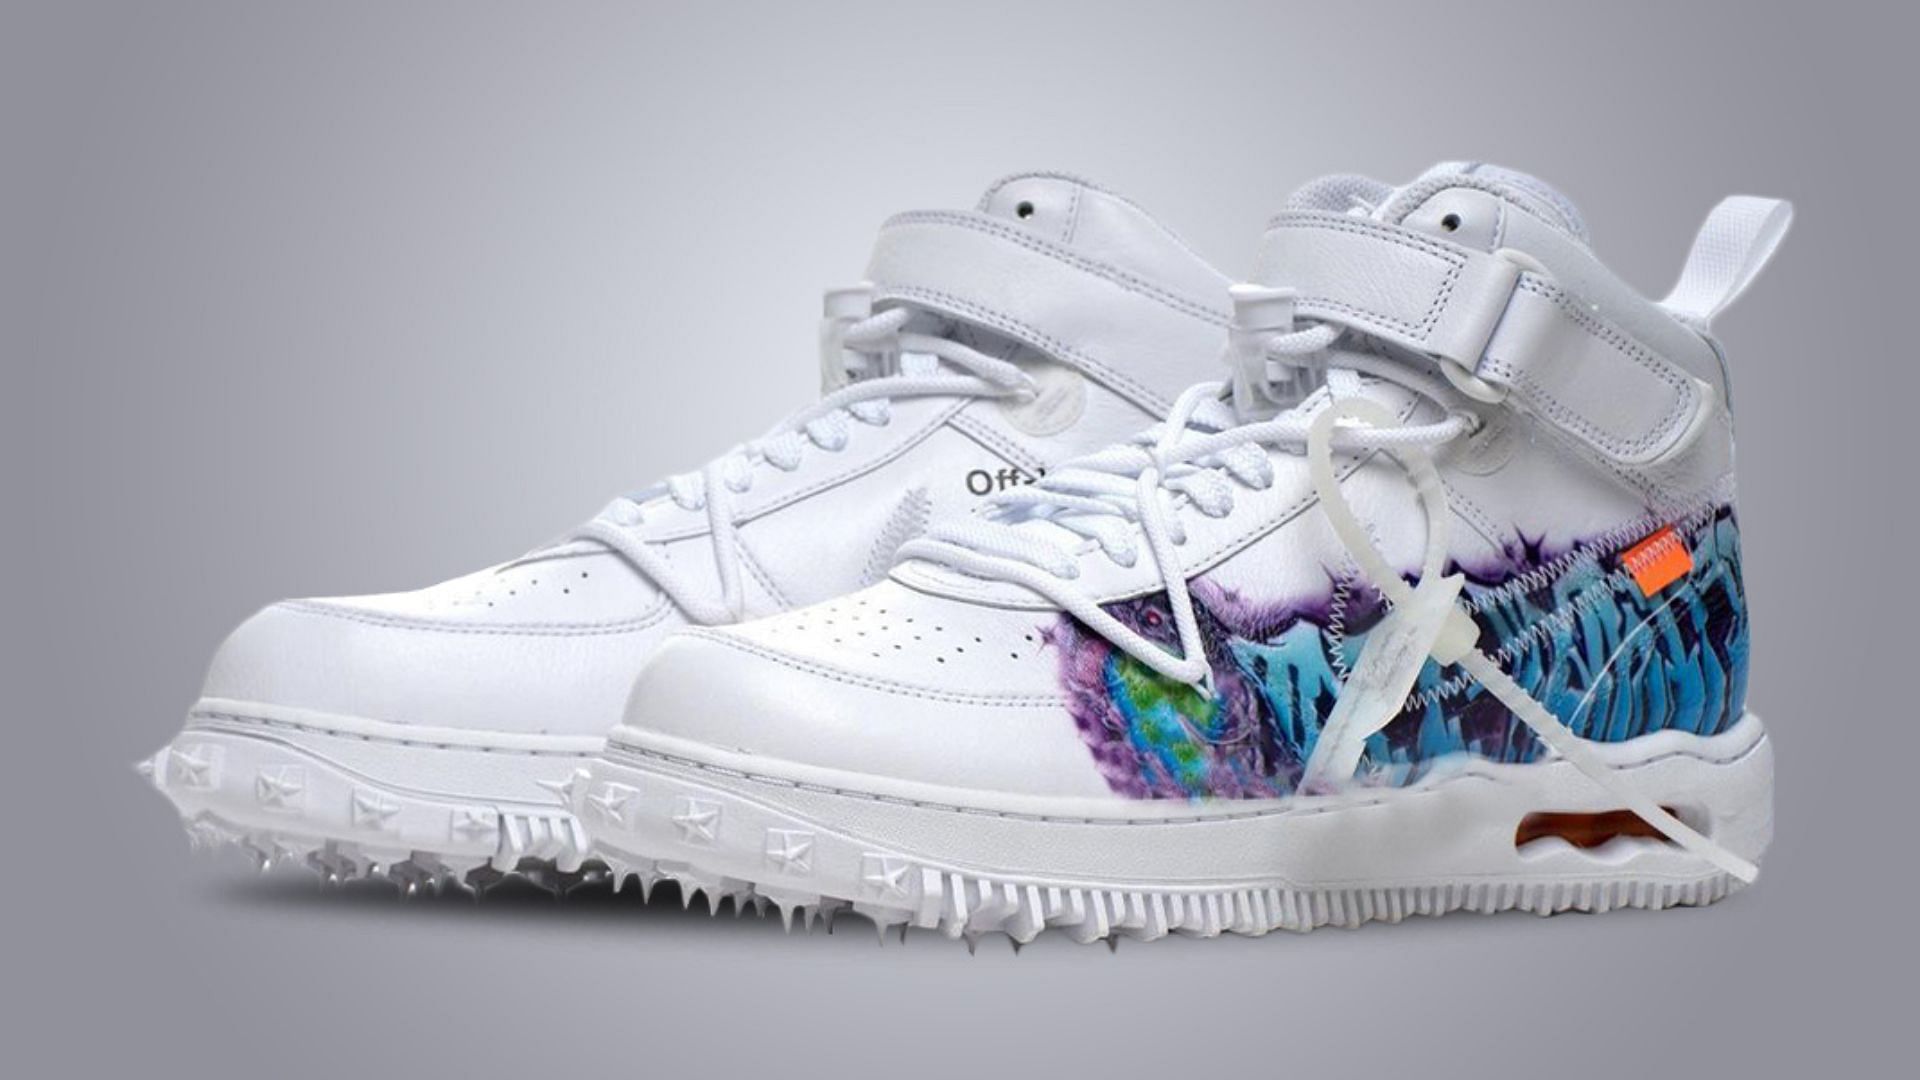 Where louis vuitton nike air force to buy Off-White x Nike Air Force 1 Mid “Graffiti” shoes